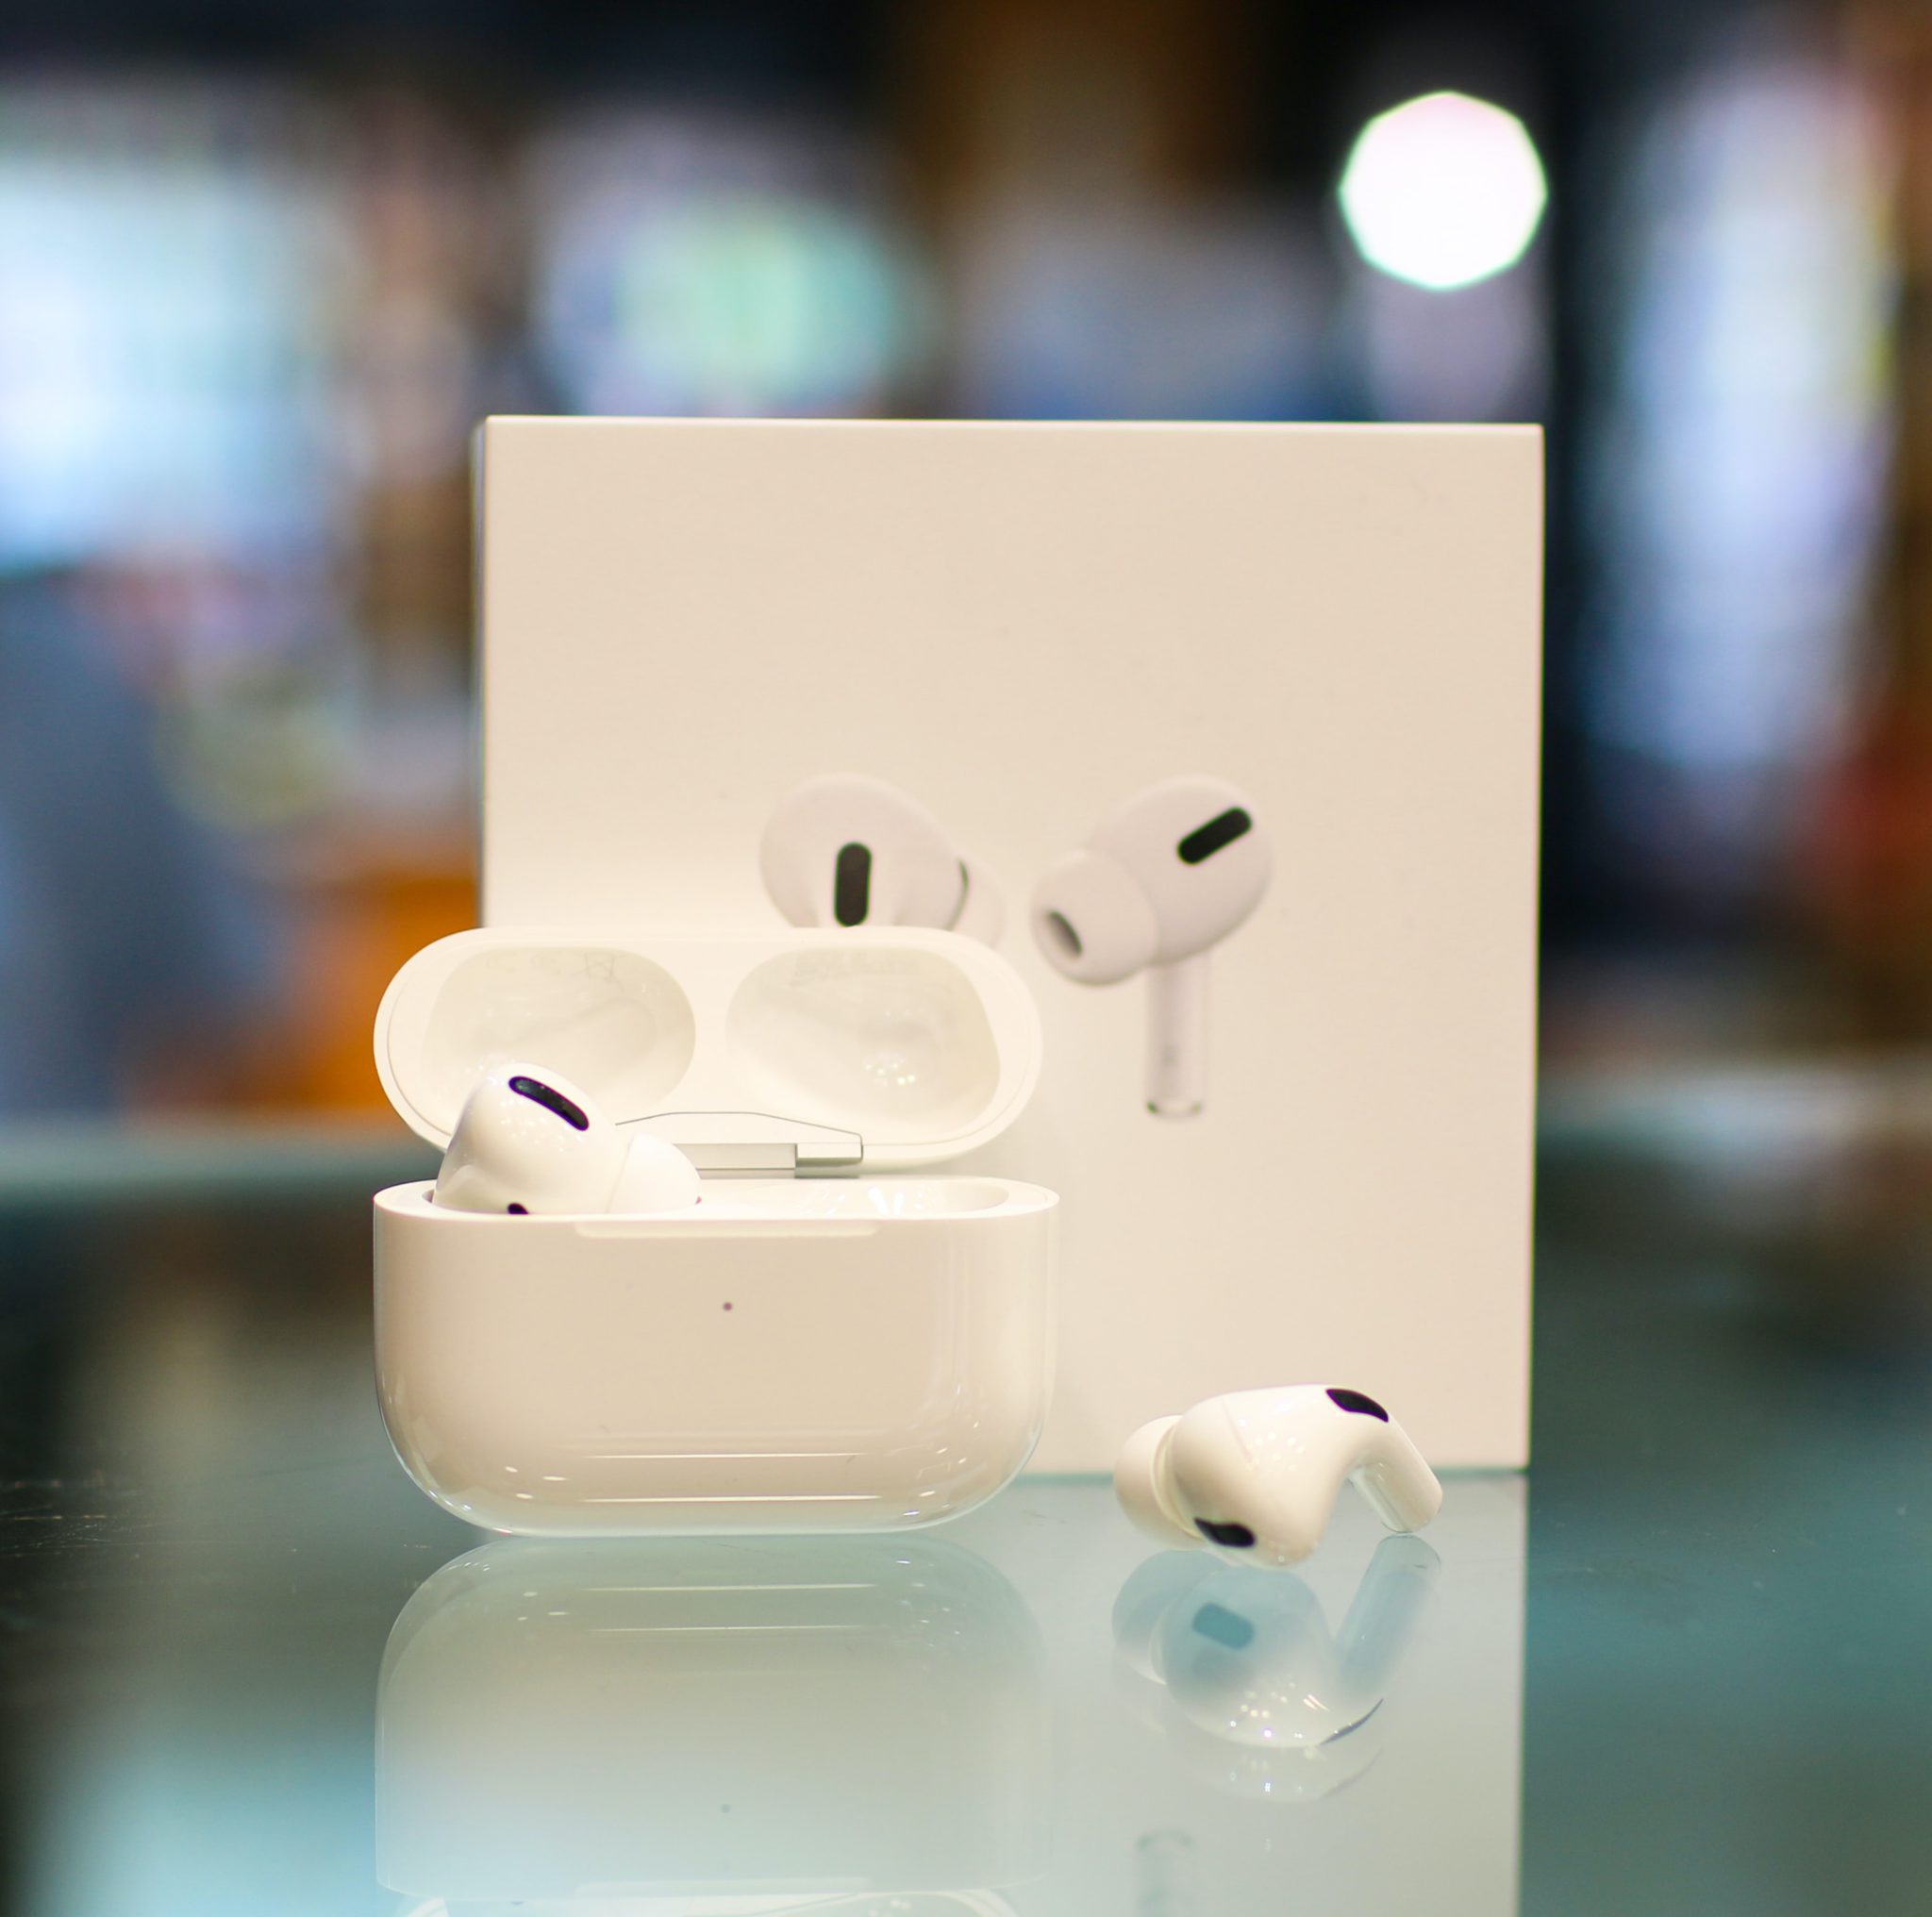 AirPods Pro with the charging case